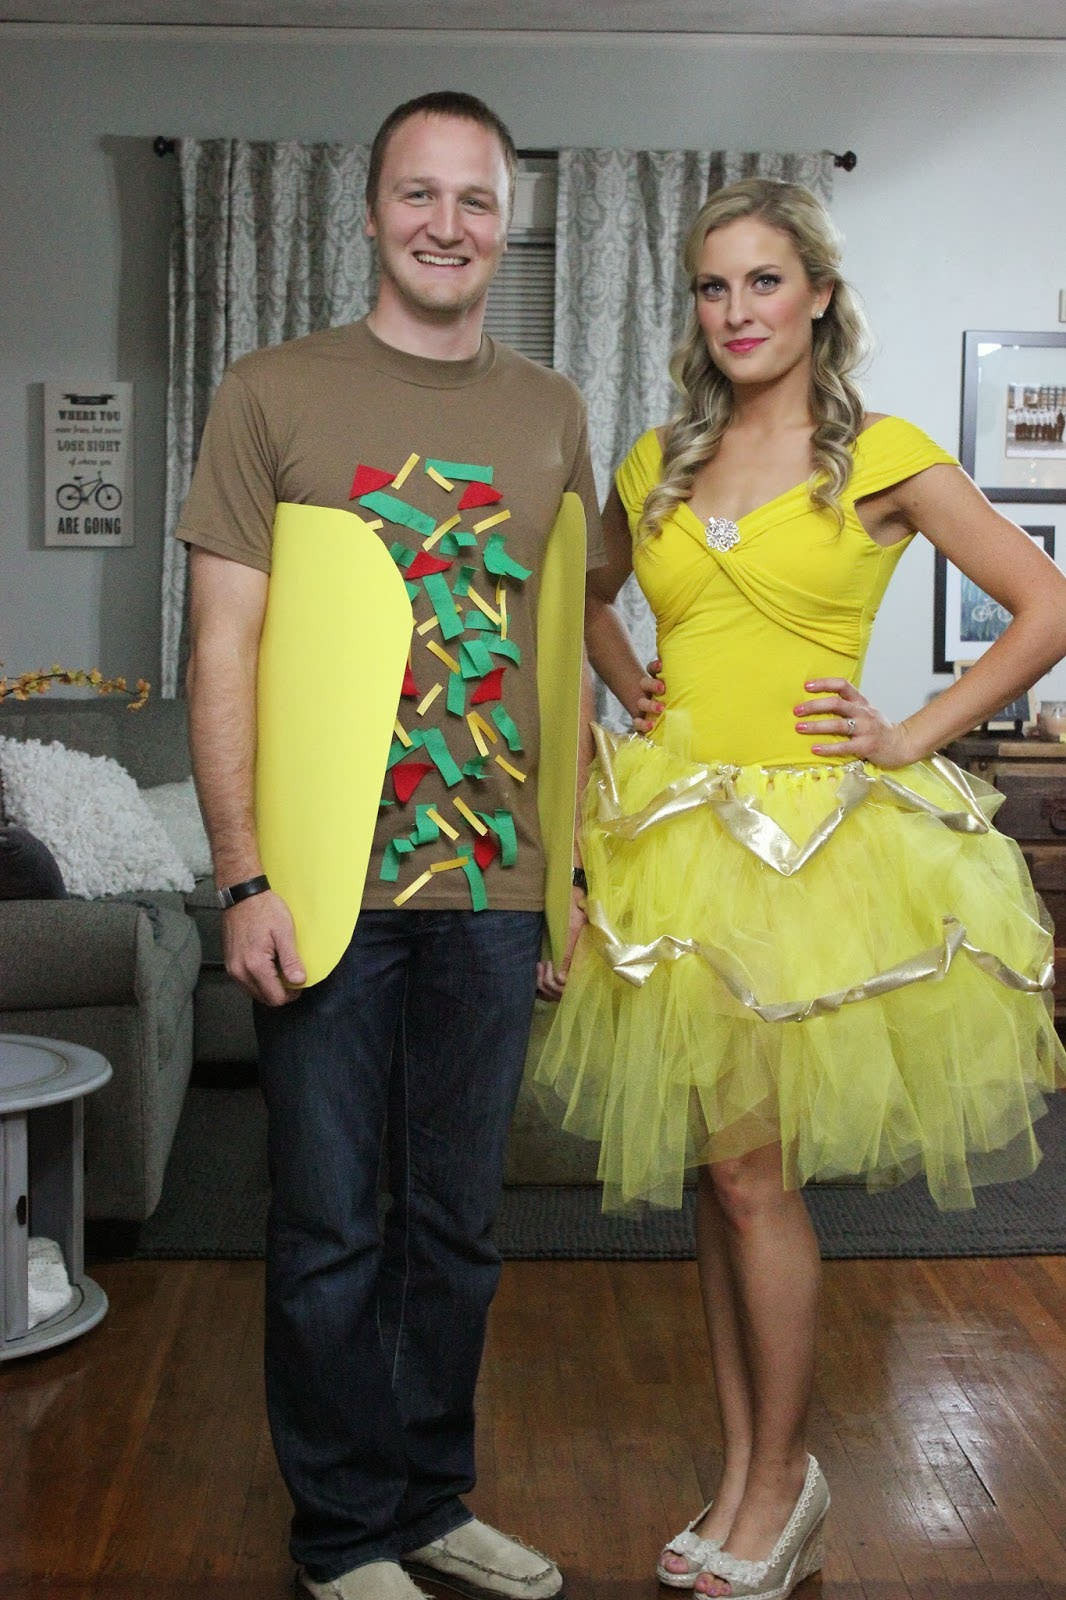 Funny DIY Couples Costumes
 15 DIY Couples and Family Halloween Costumes